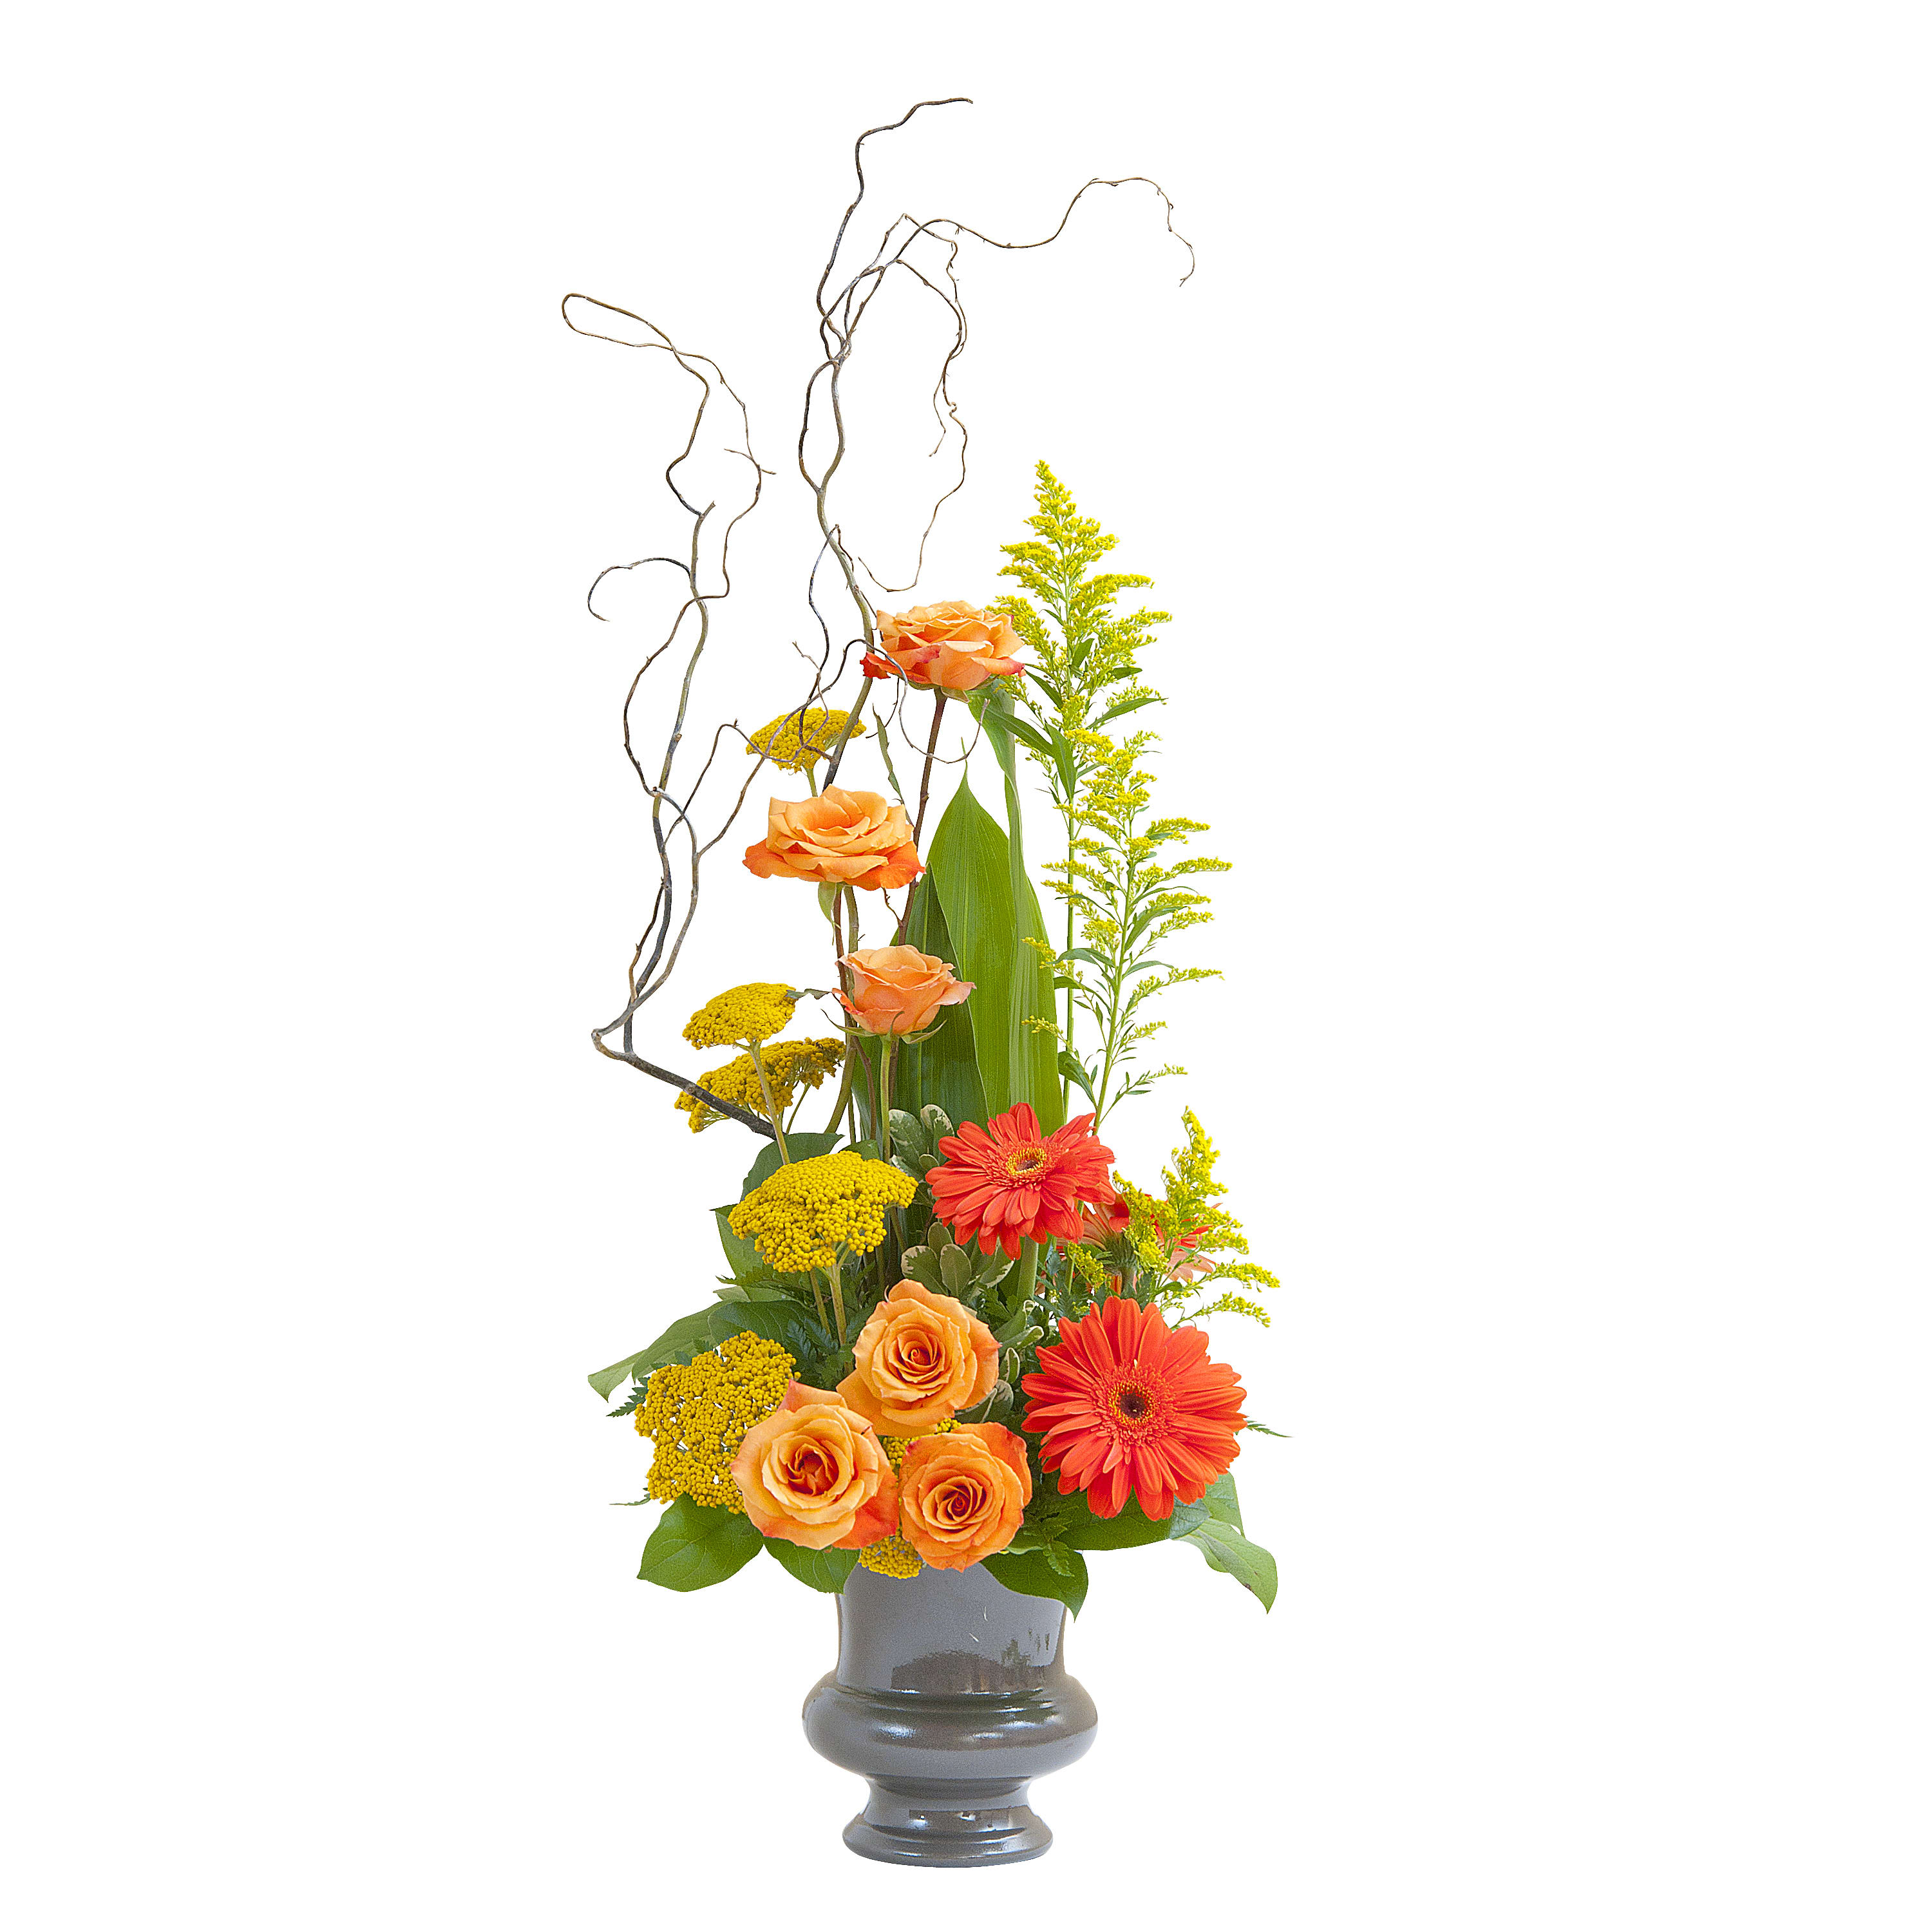 Heaven's Sunset Small Urn - A stylized urn design in the warm colors of a sunset. Approximately 12&quot; wide by 30&quot; high